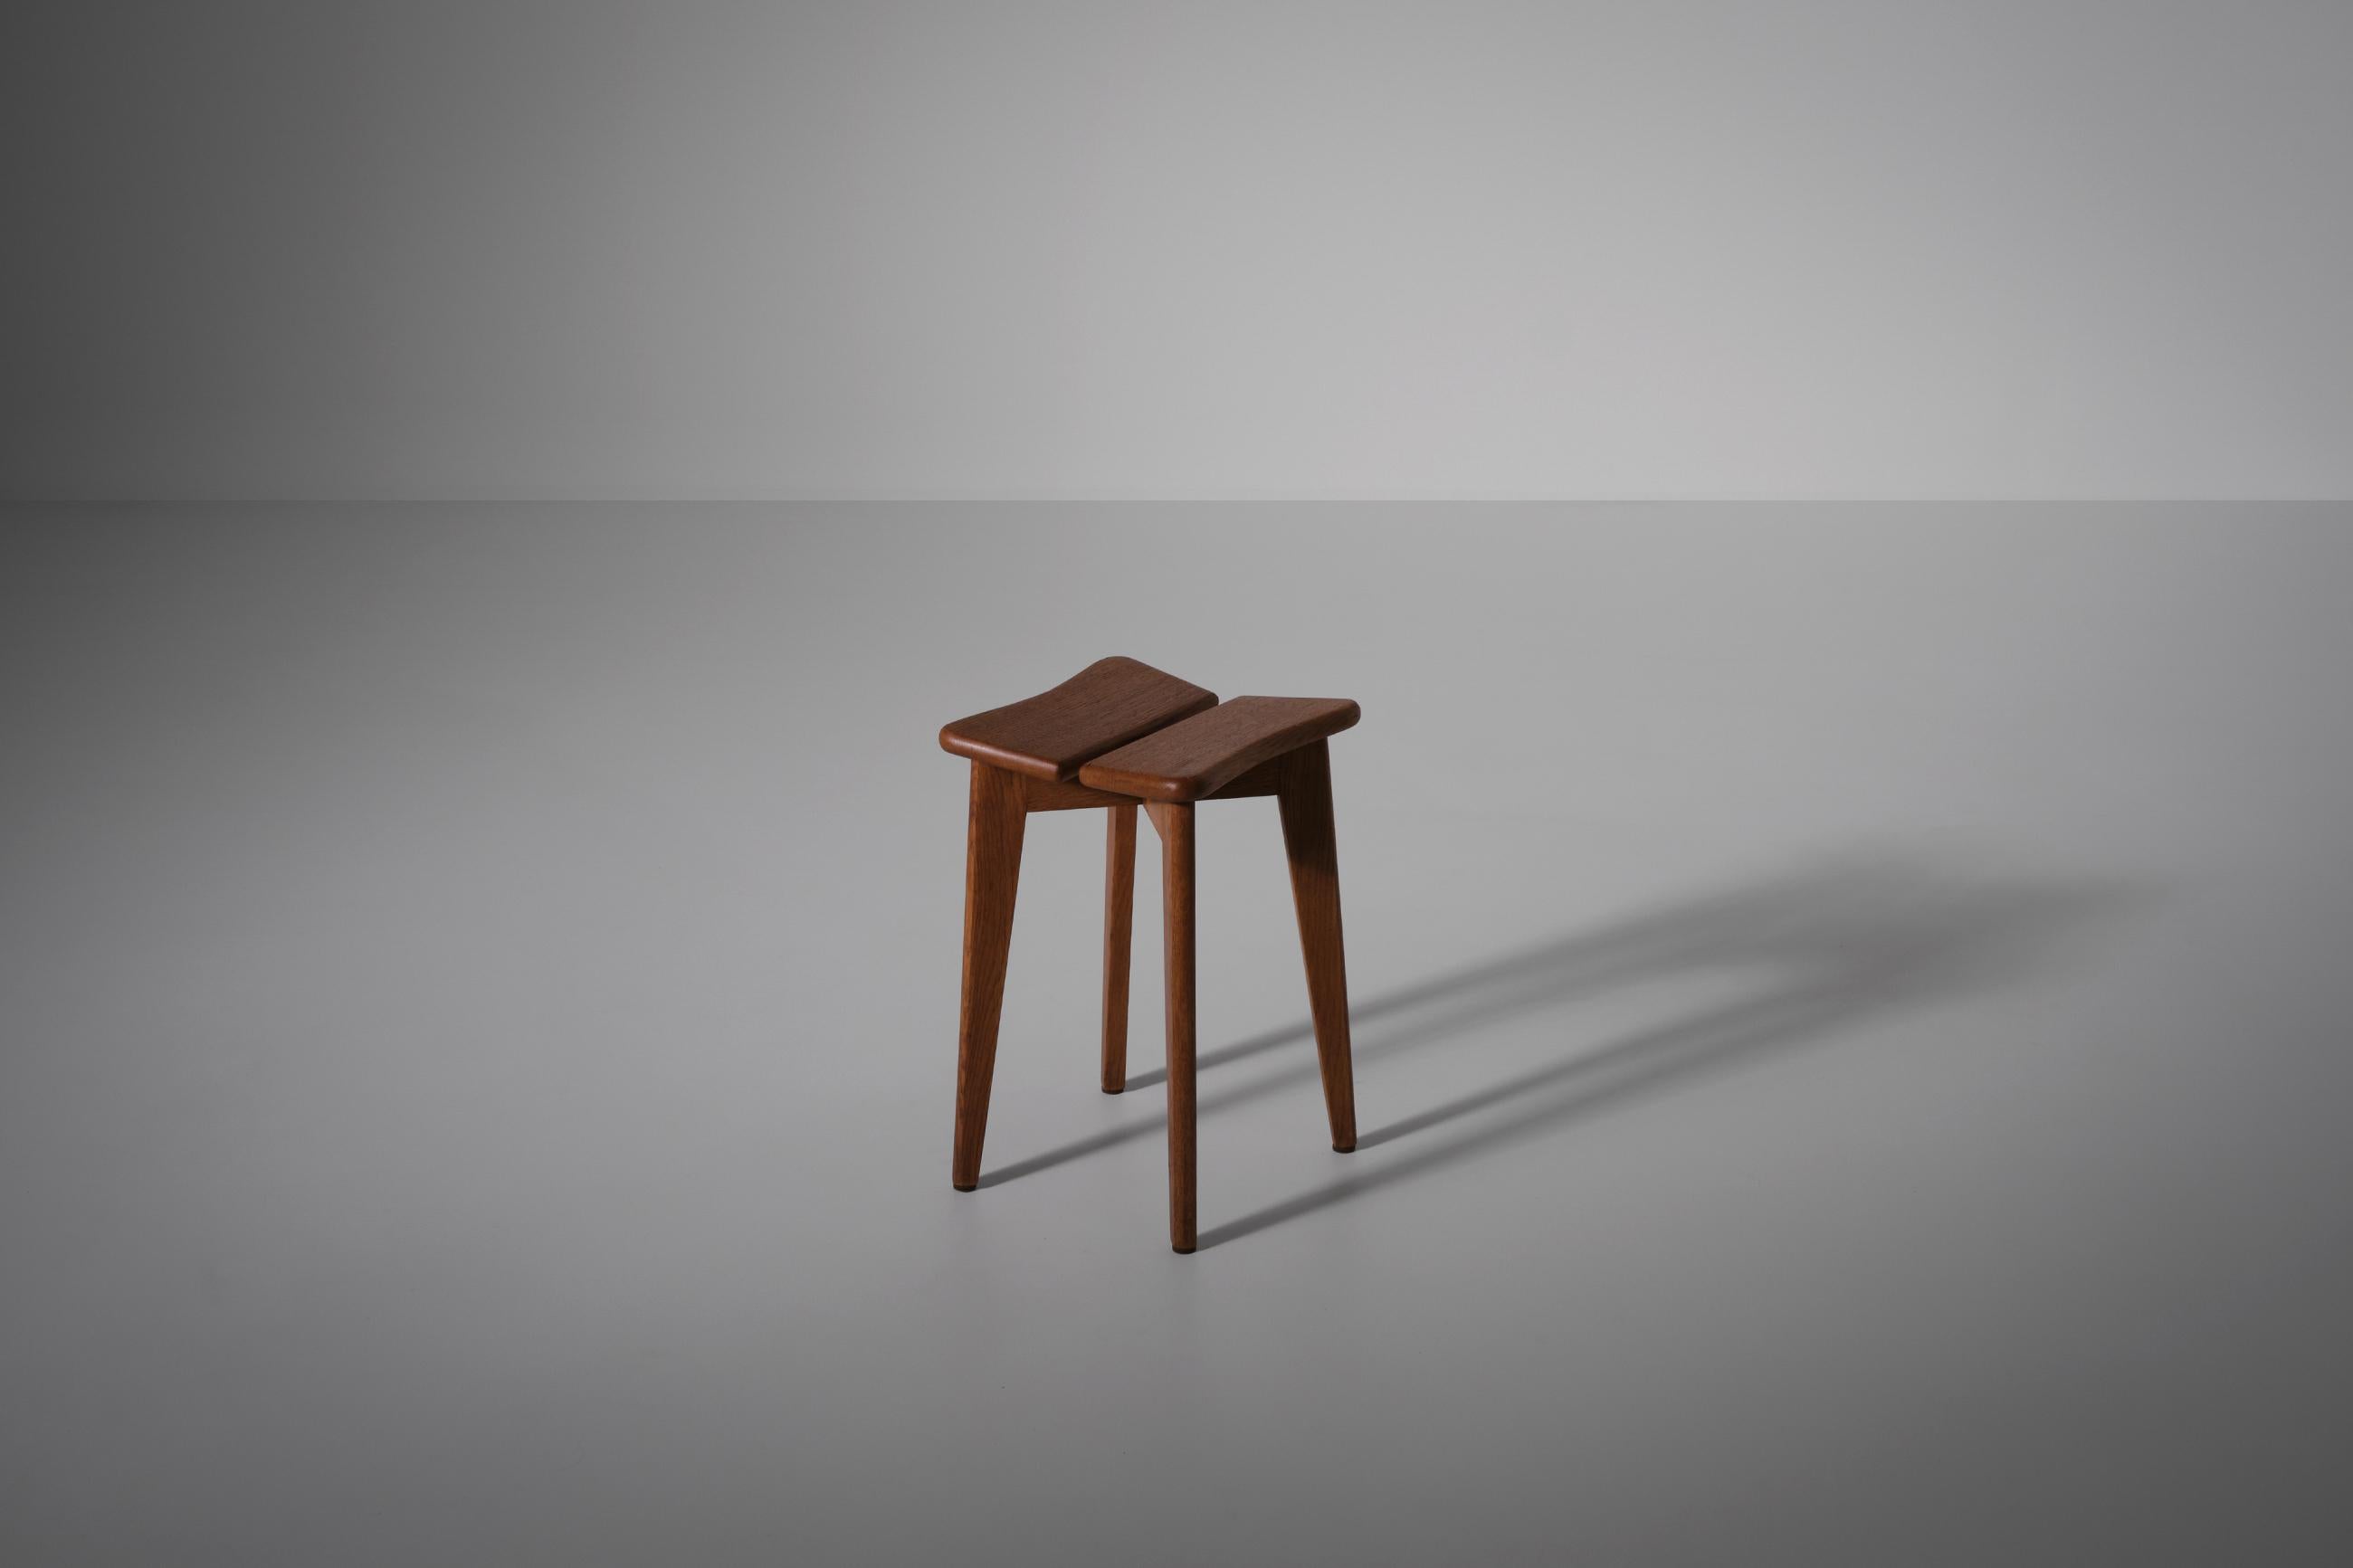 Original early 'Trèfle' stool by Marcel Gascoin, France 1949. The design is a true icon of the French post war 'reconstruction' furniture: functional furniture, with simplified lines, without decoration in neutral and sober materials. The 'Trèfle'